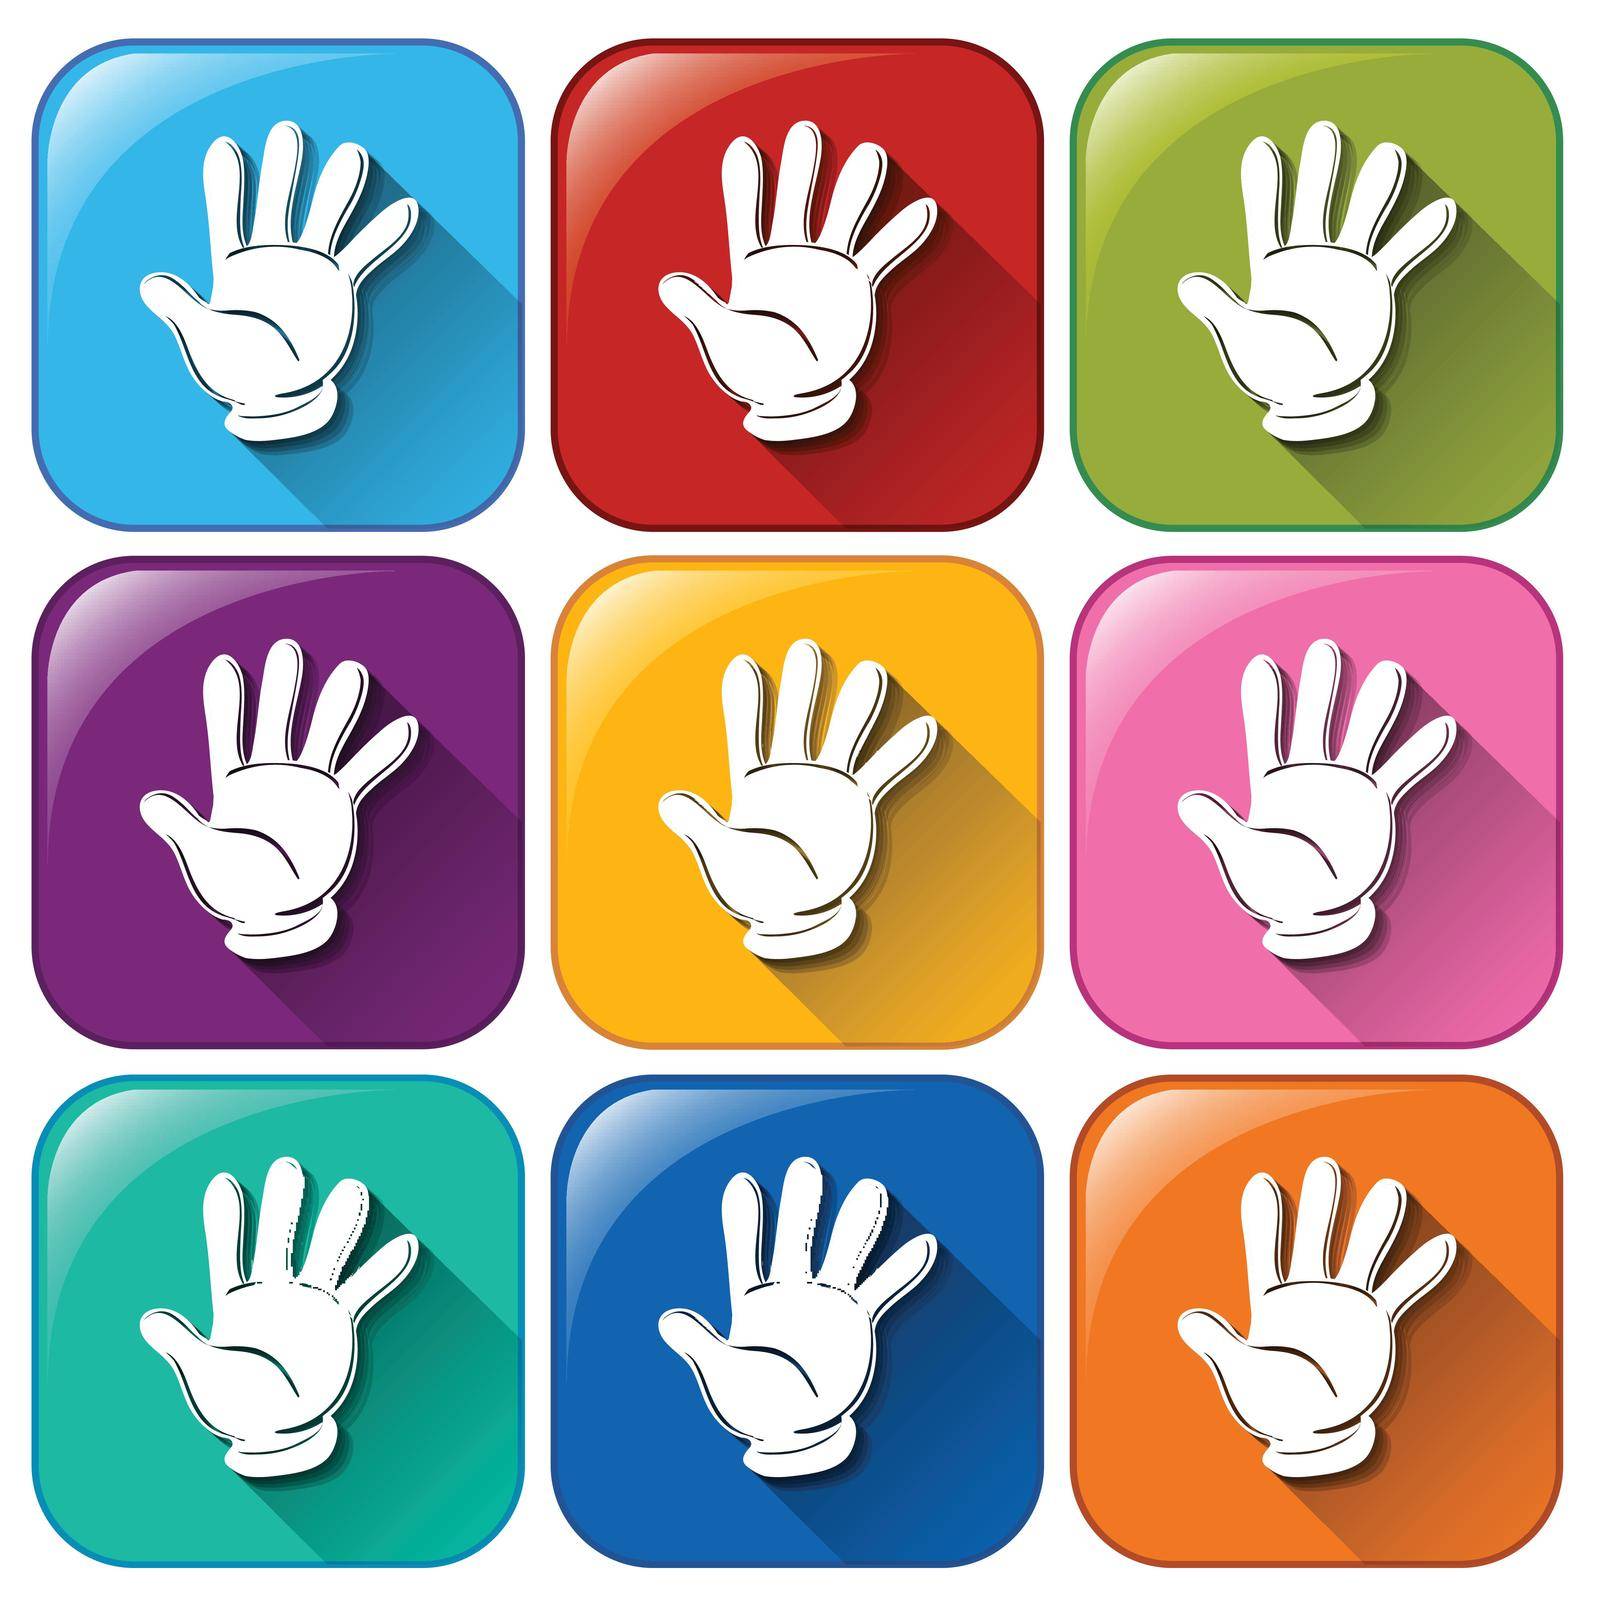 Illustration of the hand icons on a white background